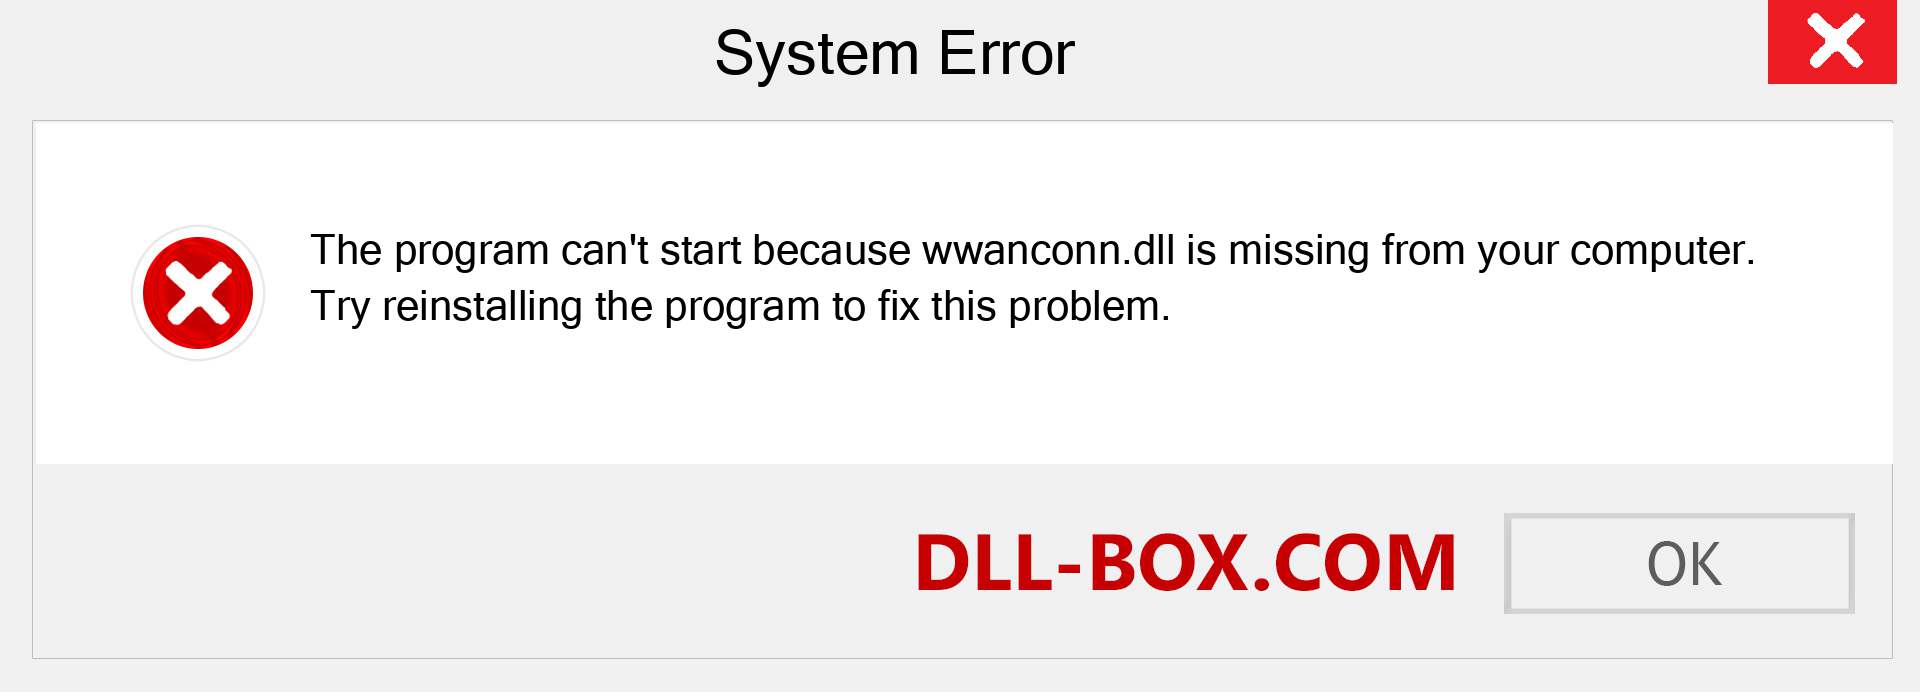  wwanconn.dll file is missing?. Download for Windows 7, 8, 10 - Fix  wwanconn dll Missing Error on Windows, photos, images